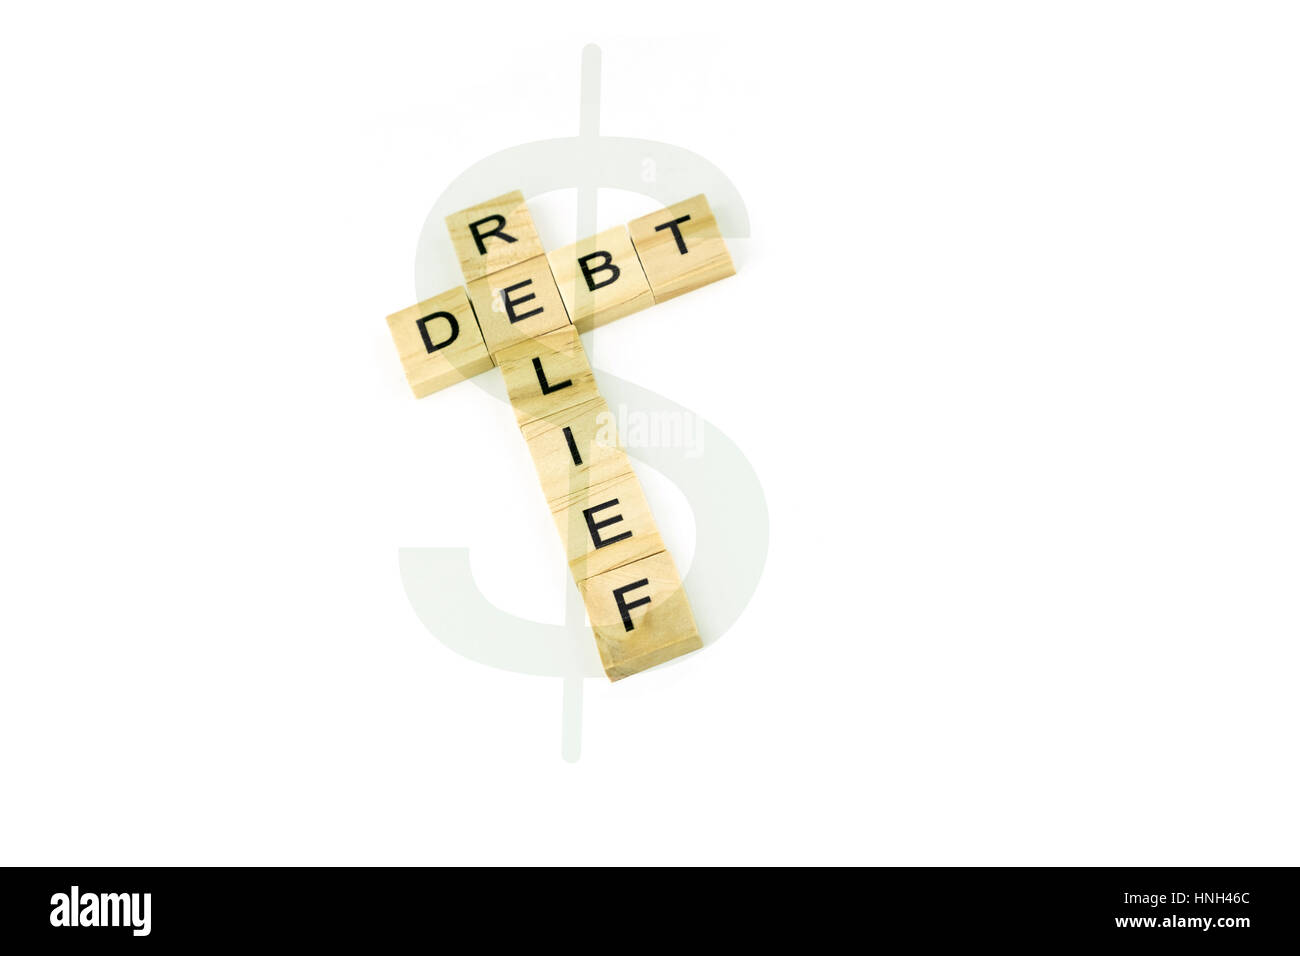 Concept debt reflief spelled out in wood blocks with dollar sign. Stock Photo